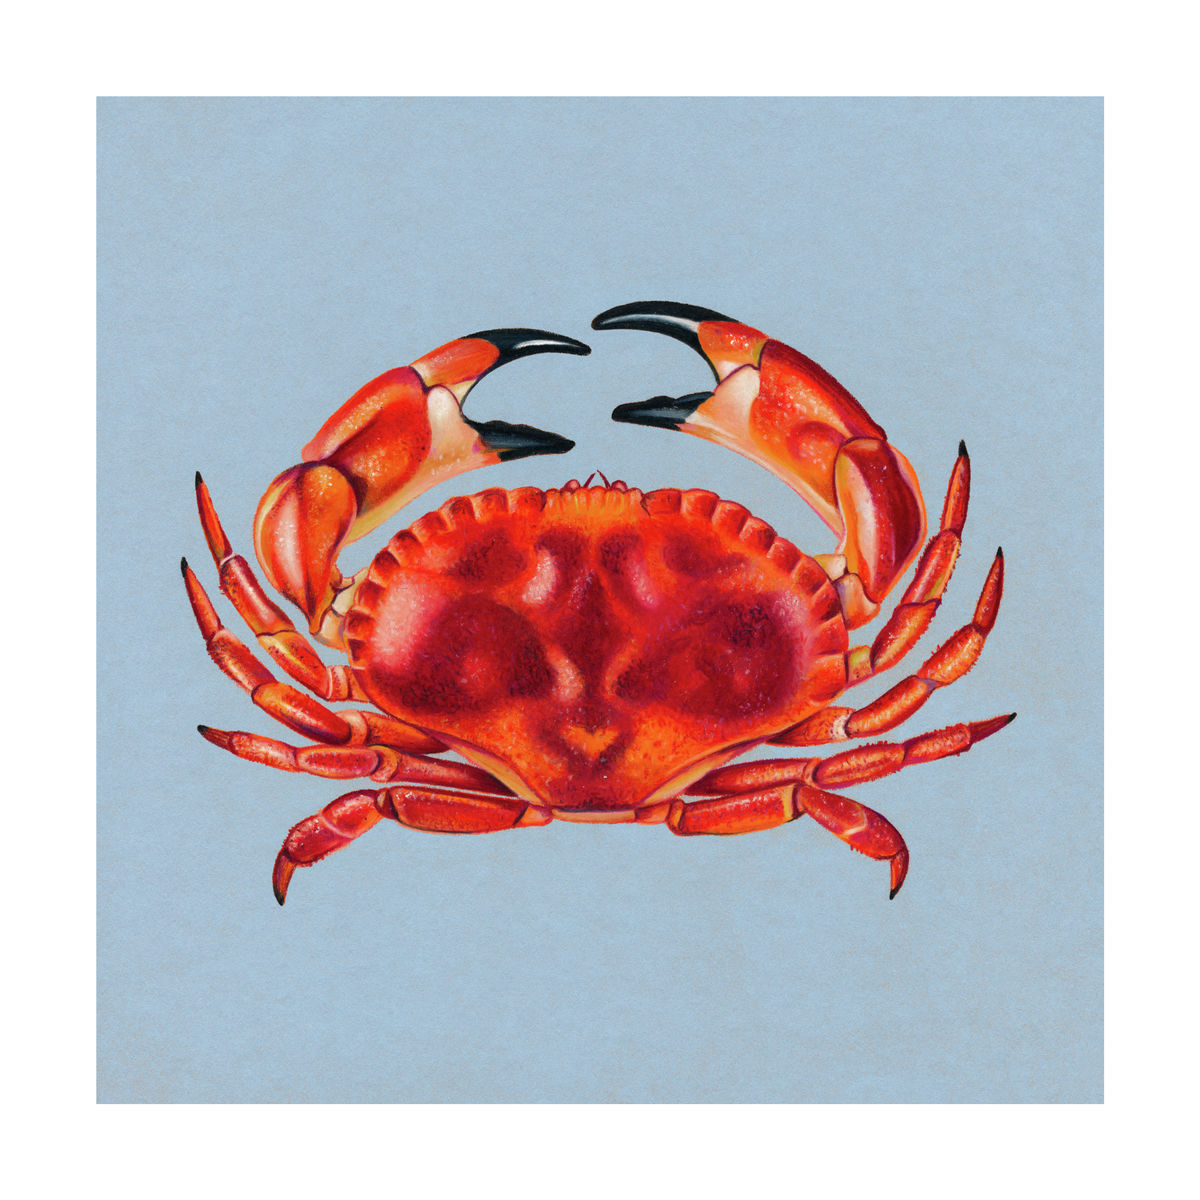 An illustration of a crab (Colour Pencil on Card) - Giclee Print